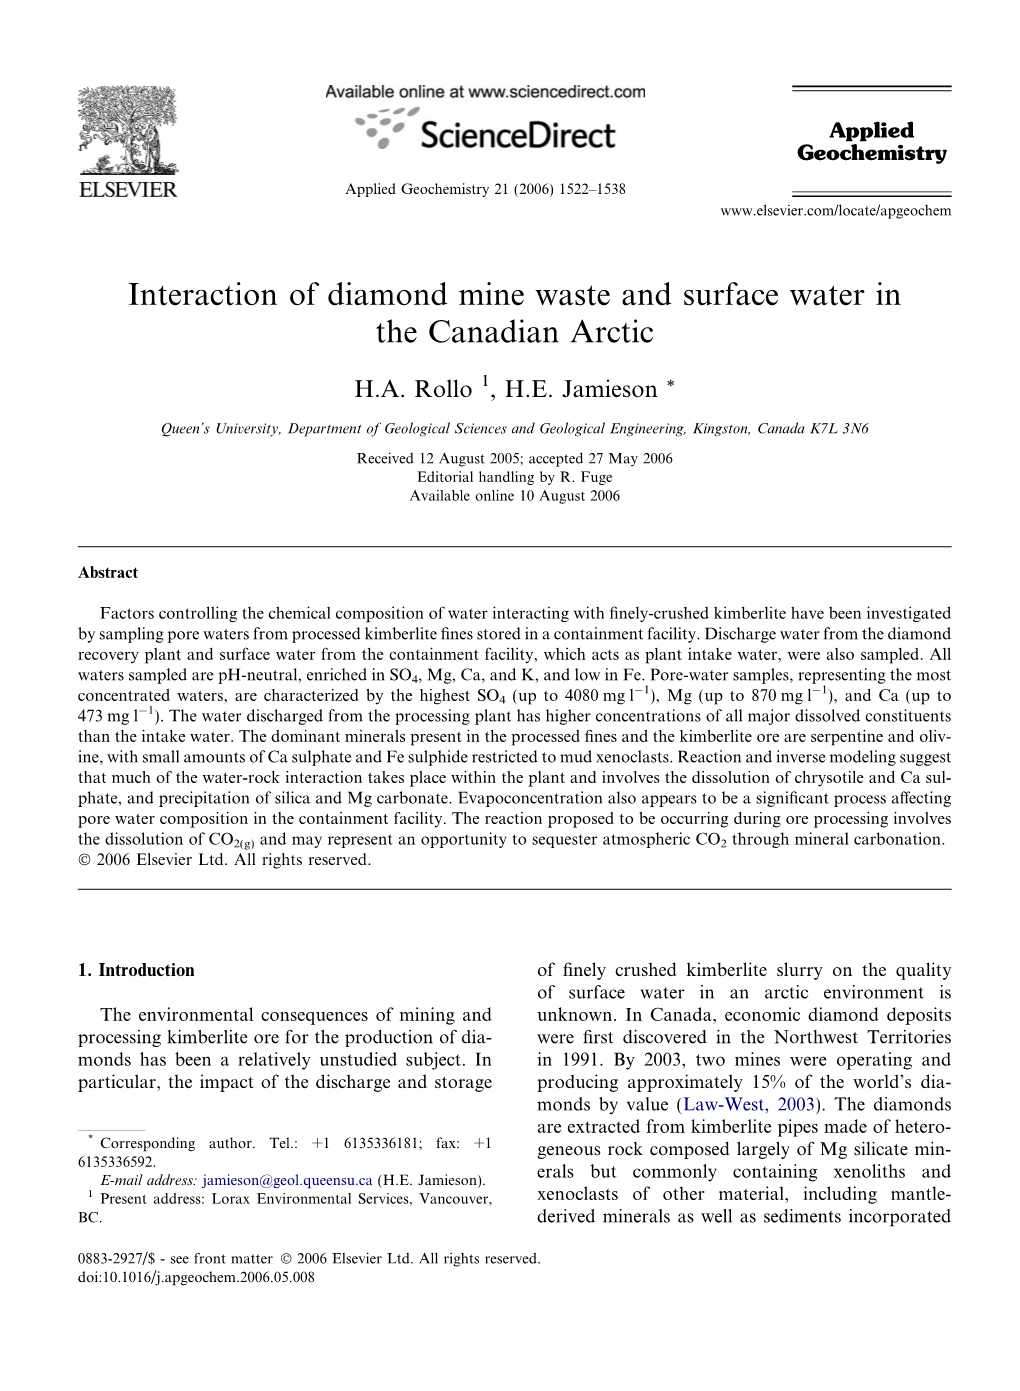 Interaction of Diamond Mine Waste and Surface Water in the Canadian Arctic